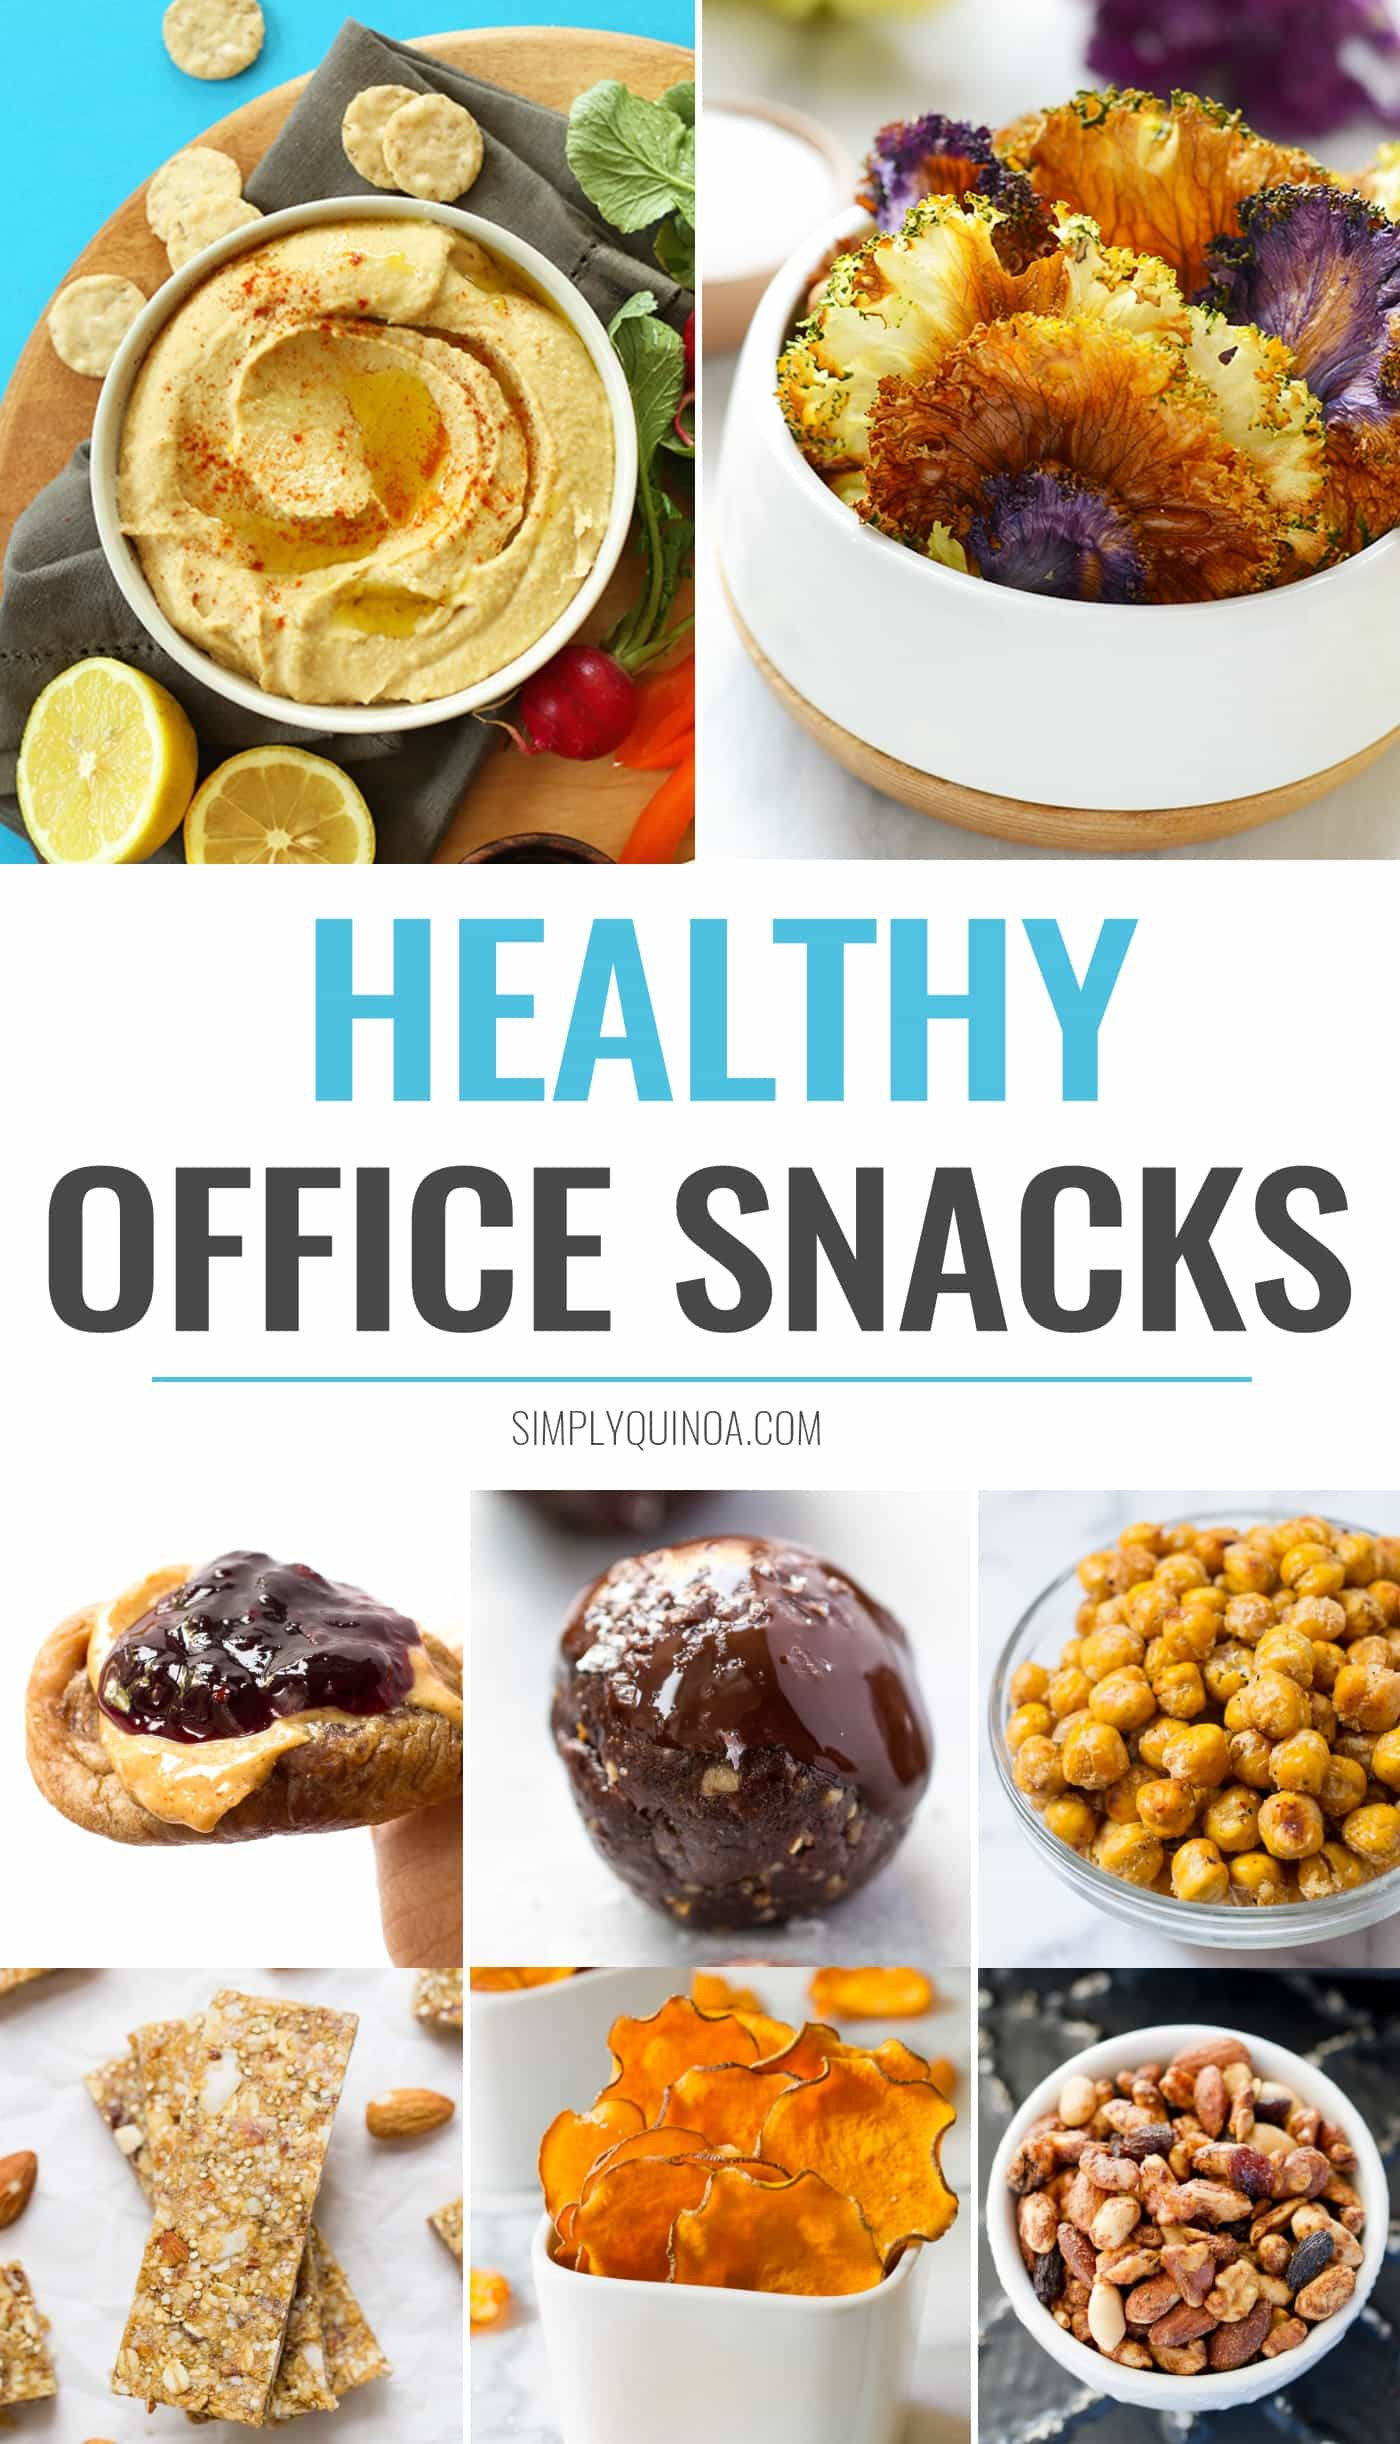 Healthy Snacks Office
 The 12 Best Healthy fice Snacks Simply Quinoa